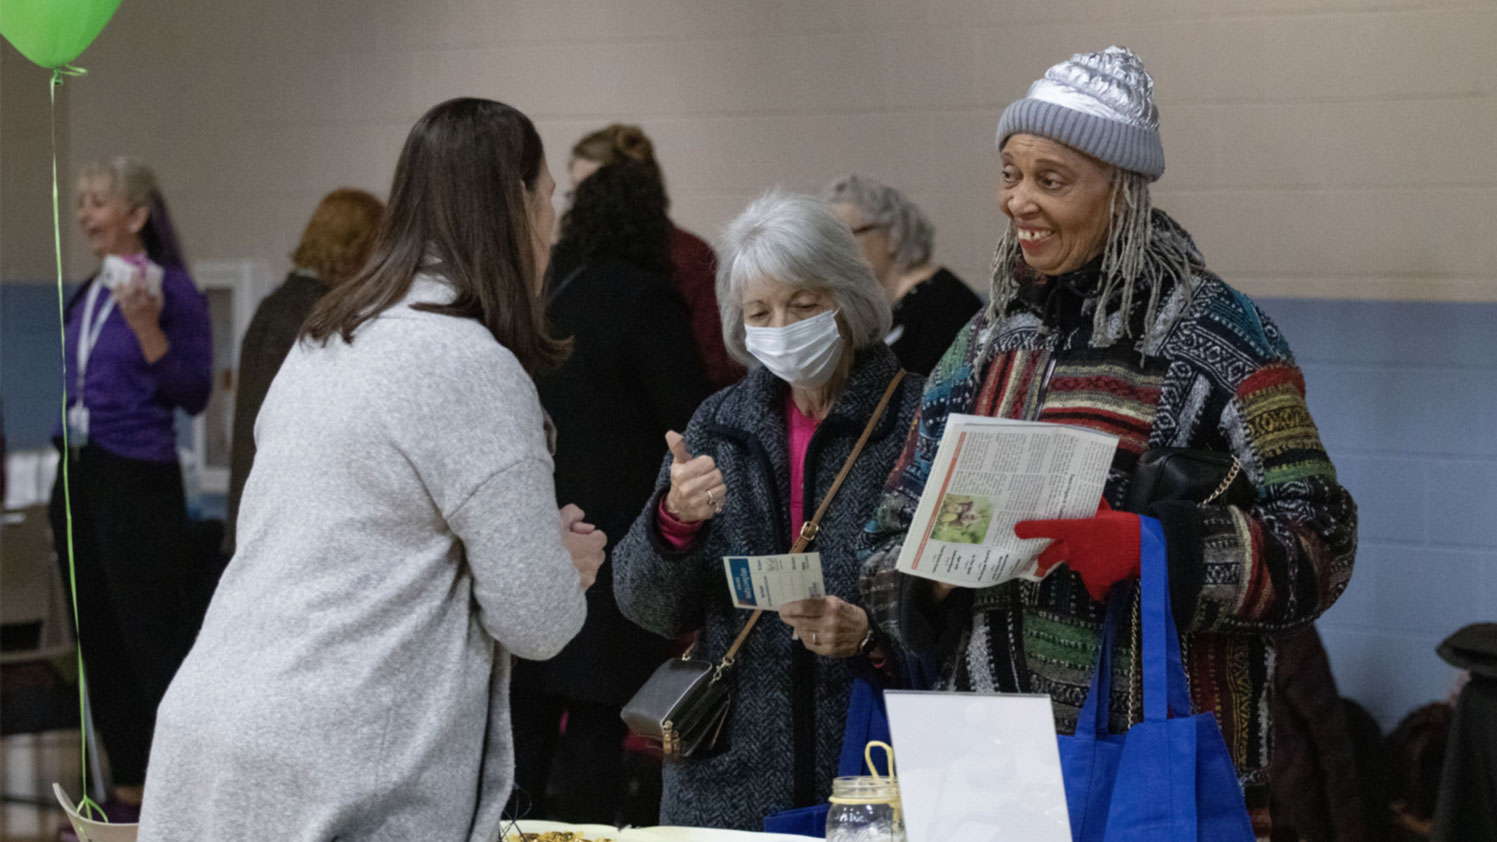 Active Adult Healthy Living Expo: Free Wellness Resources